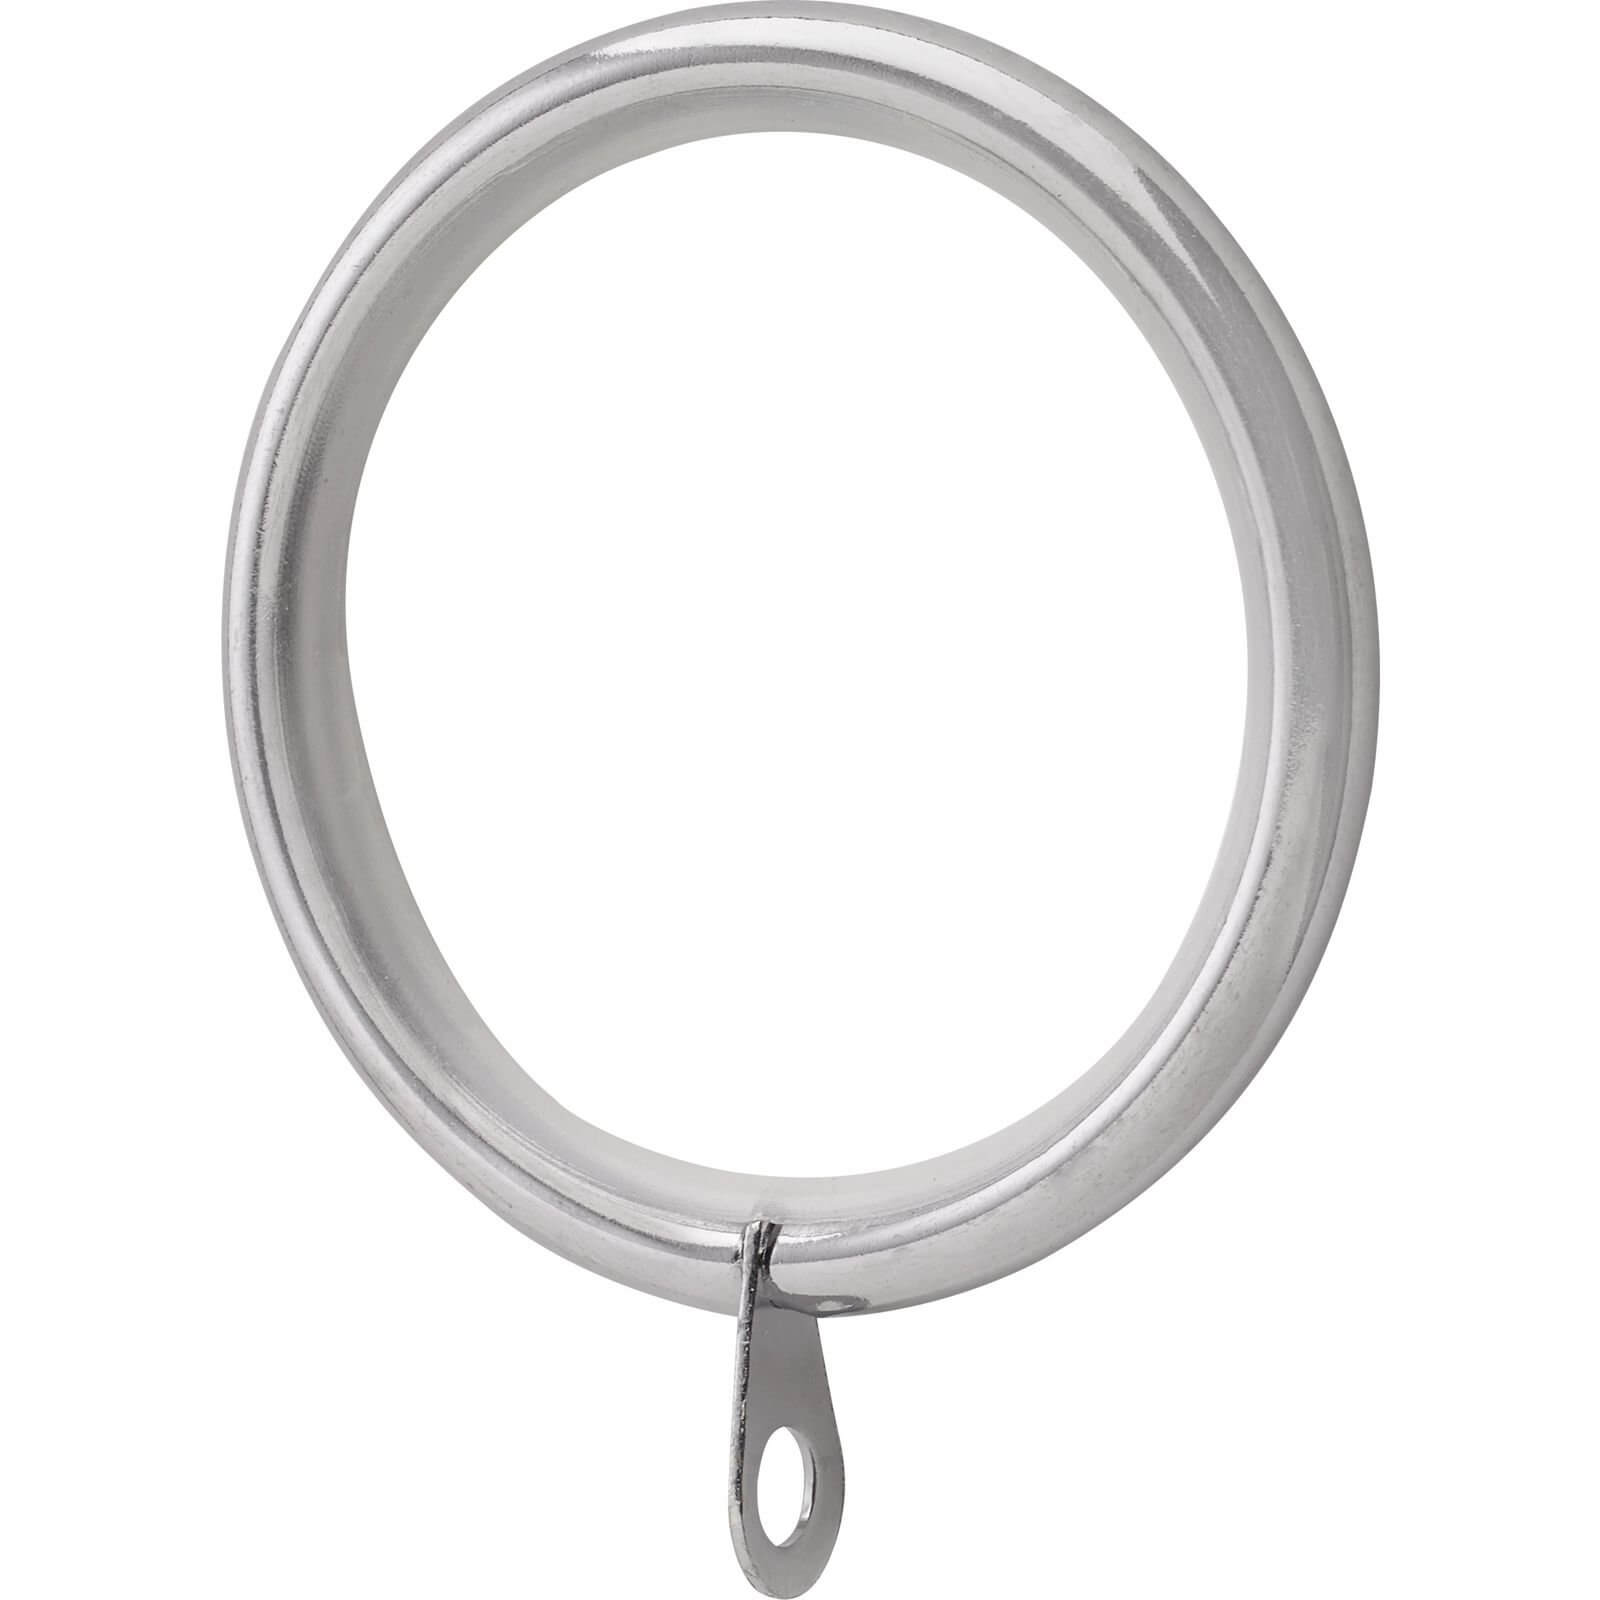 Photo of Chrome 28mm Curtain Rings 4 Pack